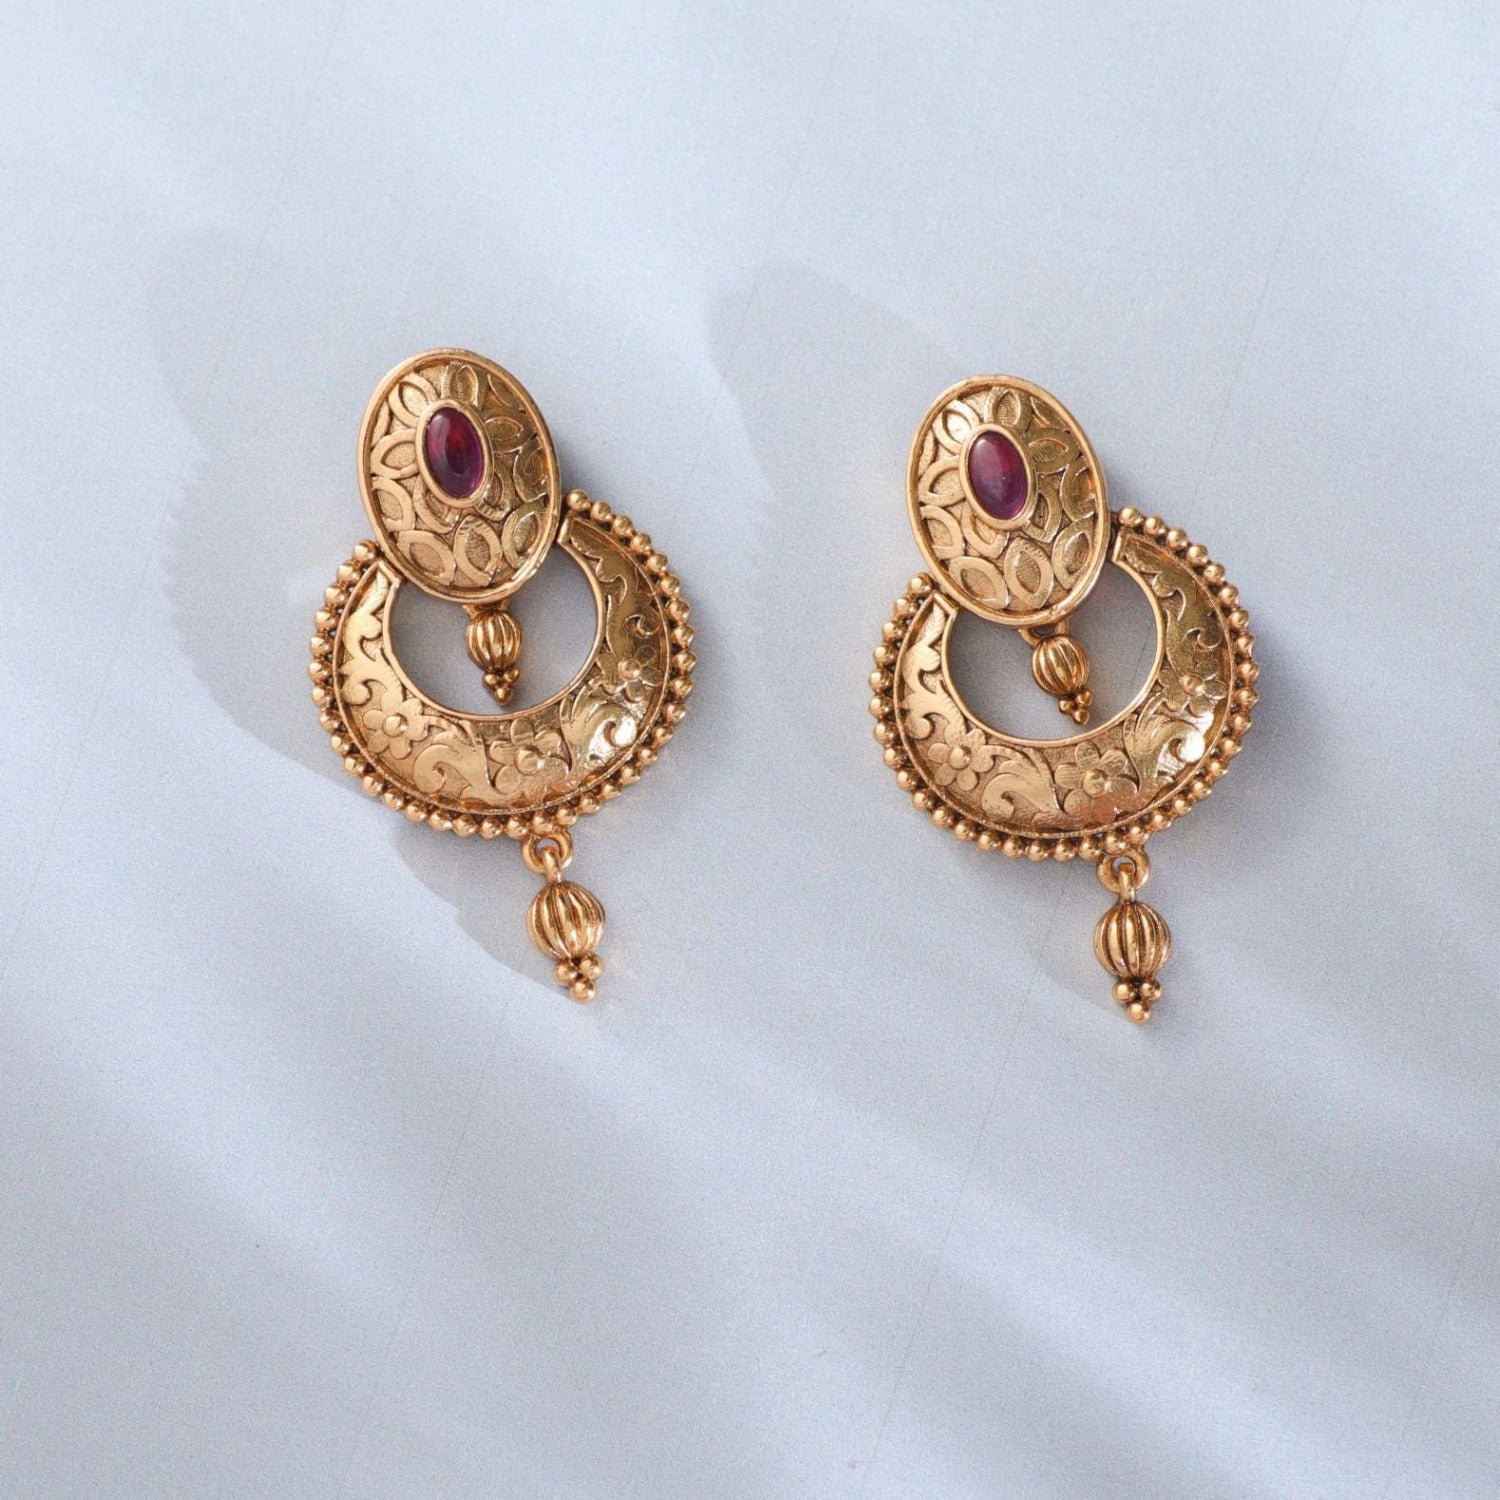 Buy Victorian antique gold earrings highlighted with enamel - Kalmar  Antiques